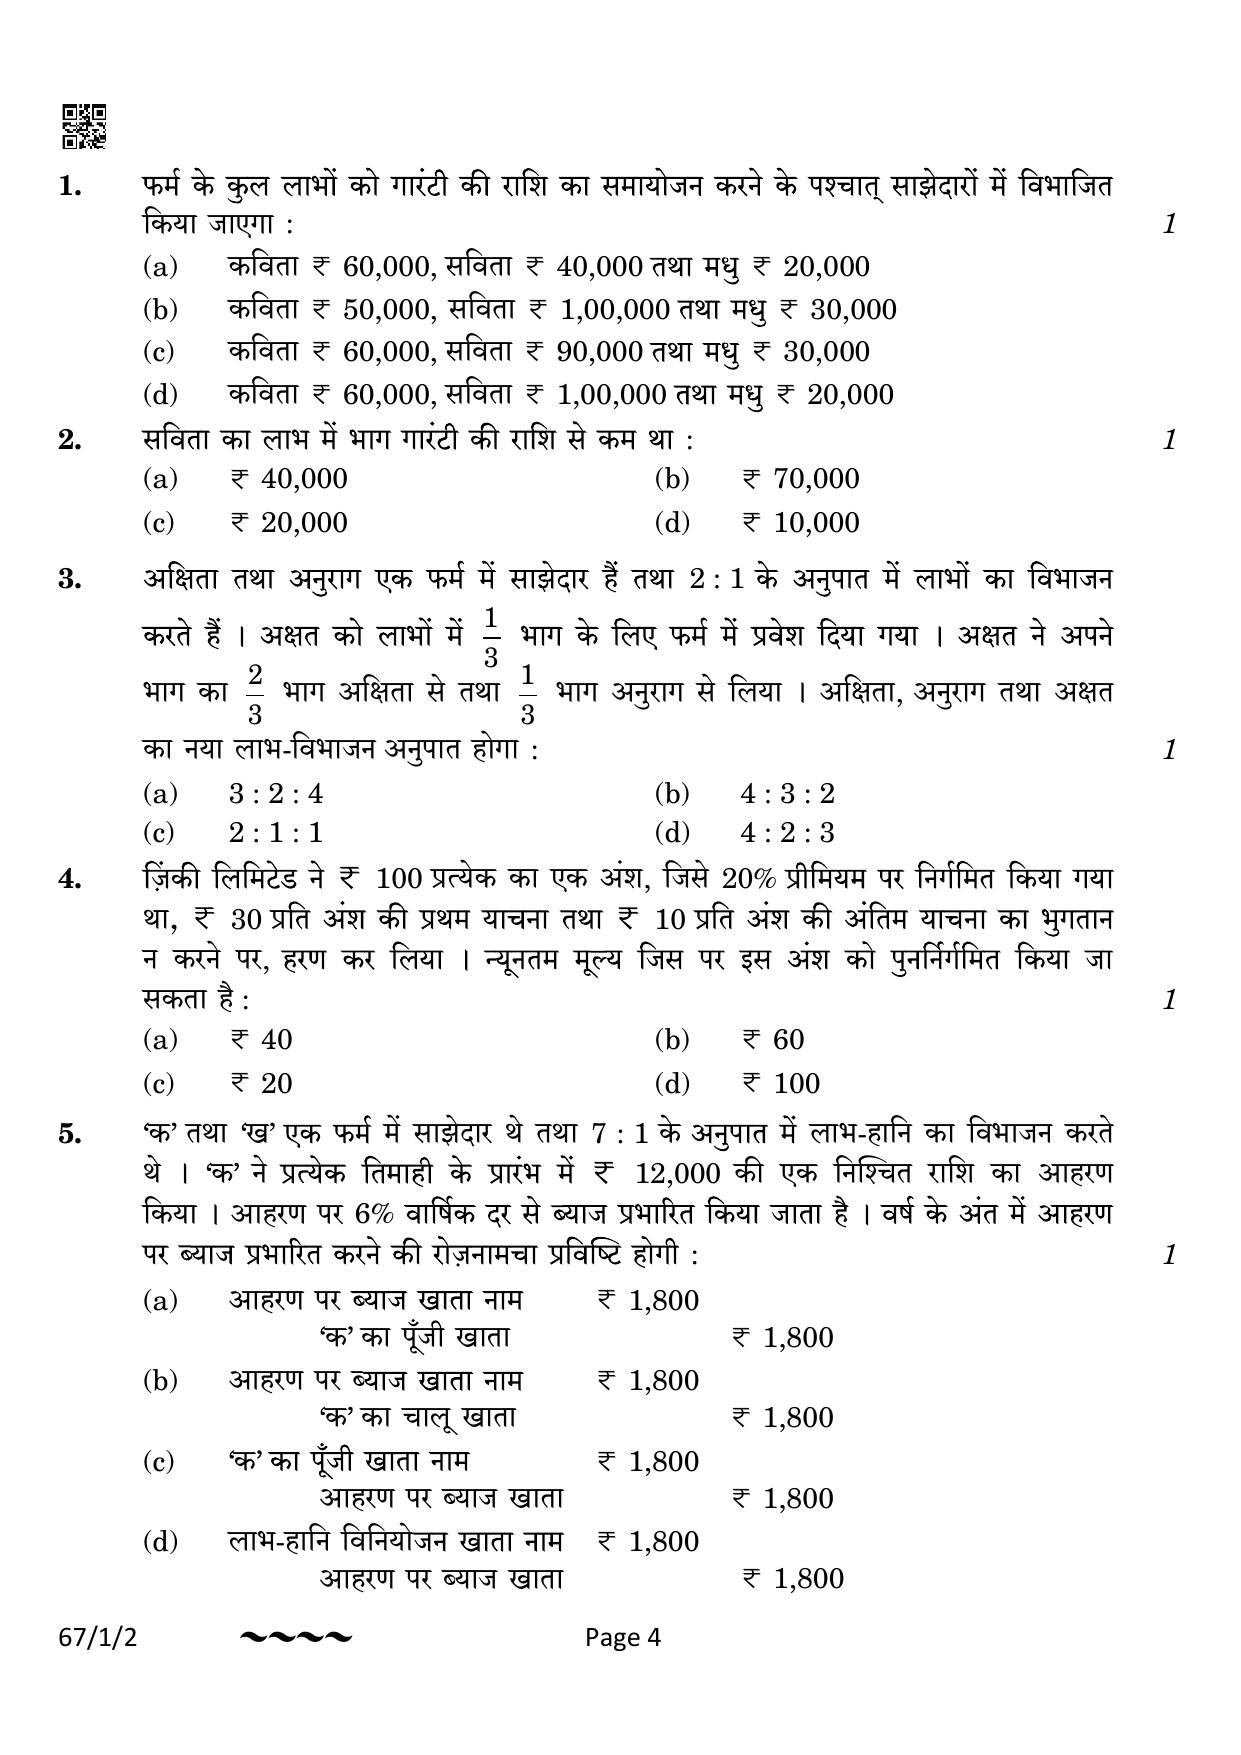 CBSE Class 12 67-1-2 Accountancy 2023 Question Paper - Page 4